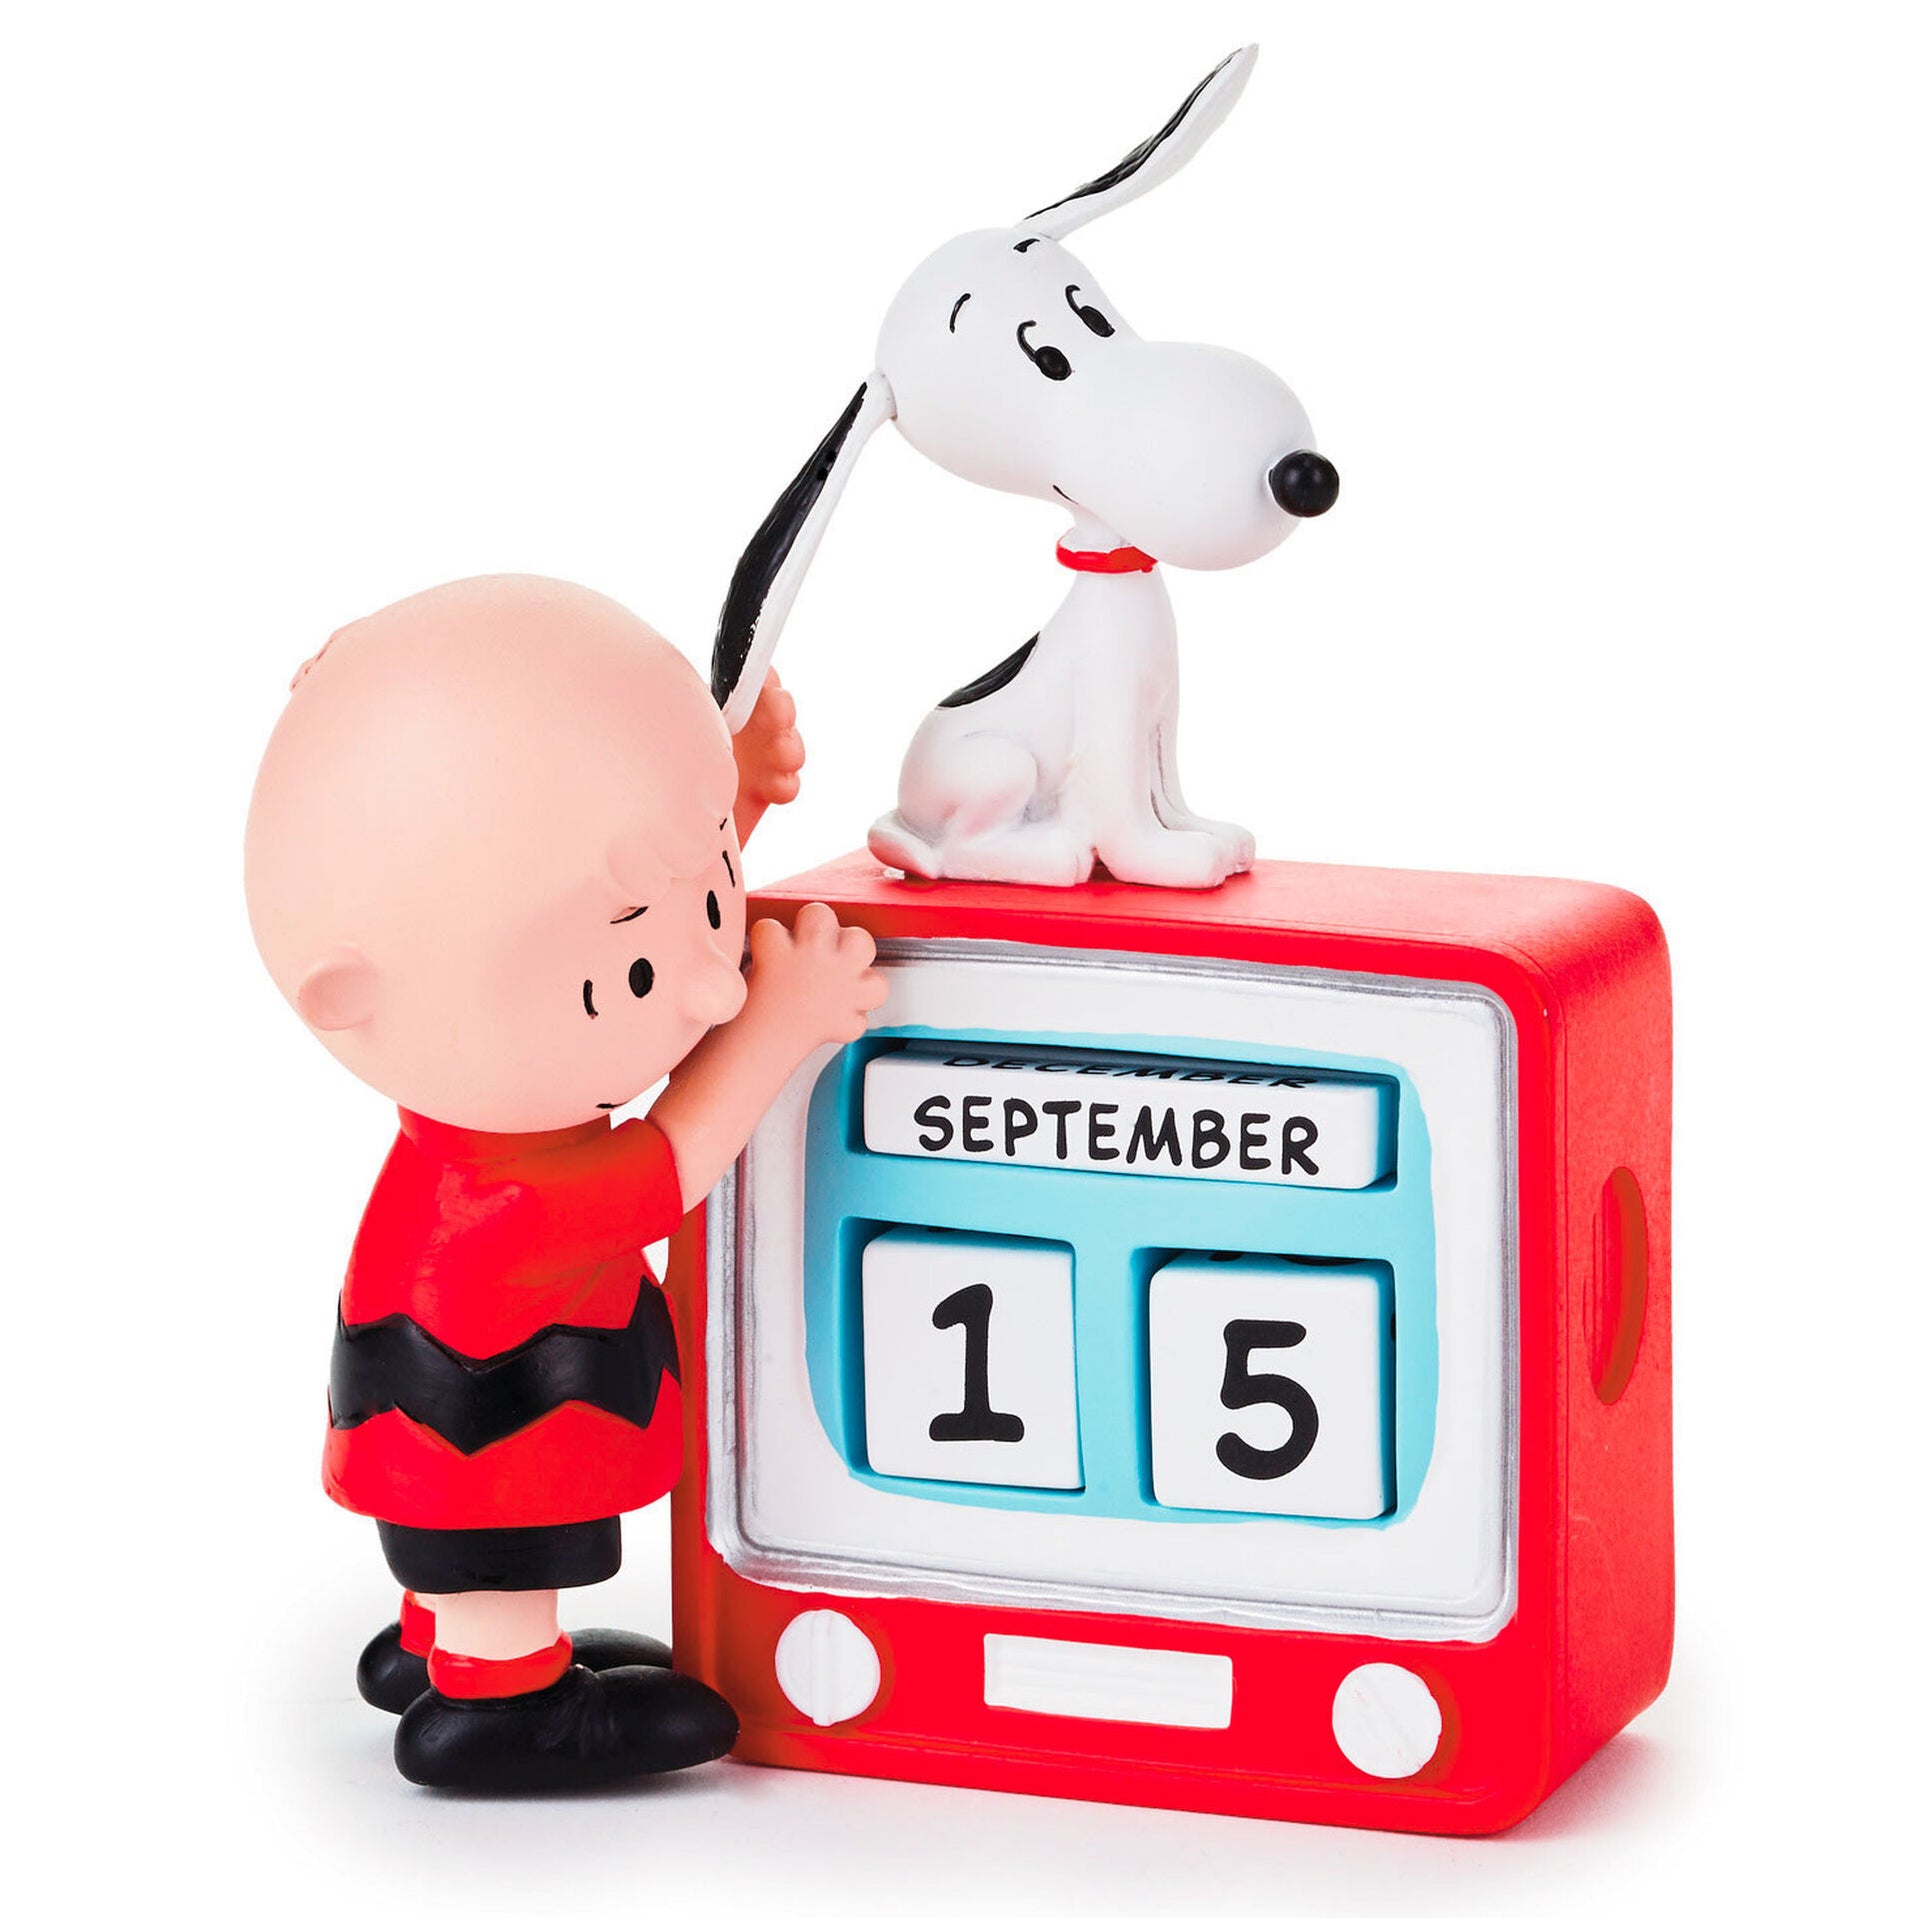 Peanuts® Charlie Brown and Snoopy TV Set Perpetual Calendar Trudy #39 s